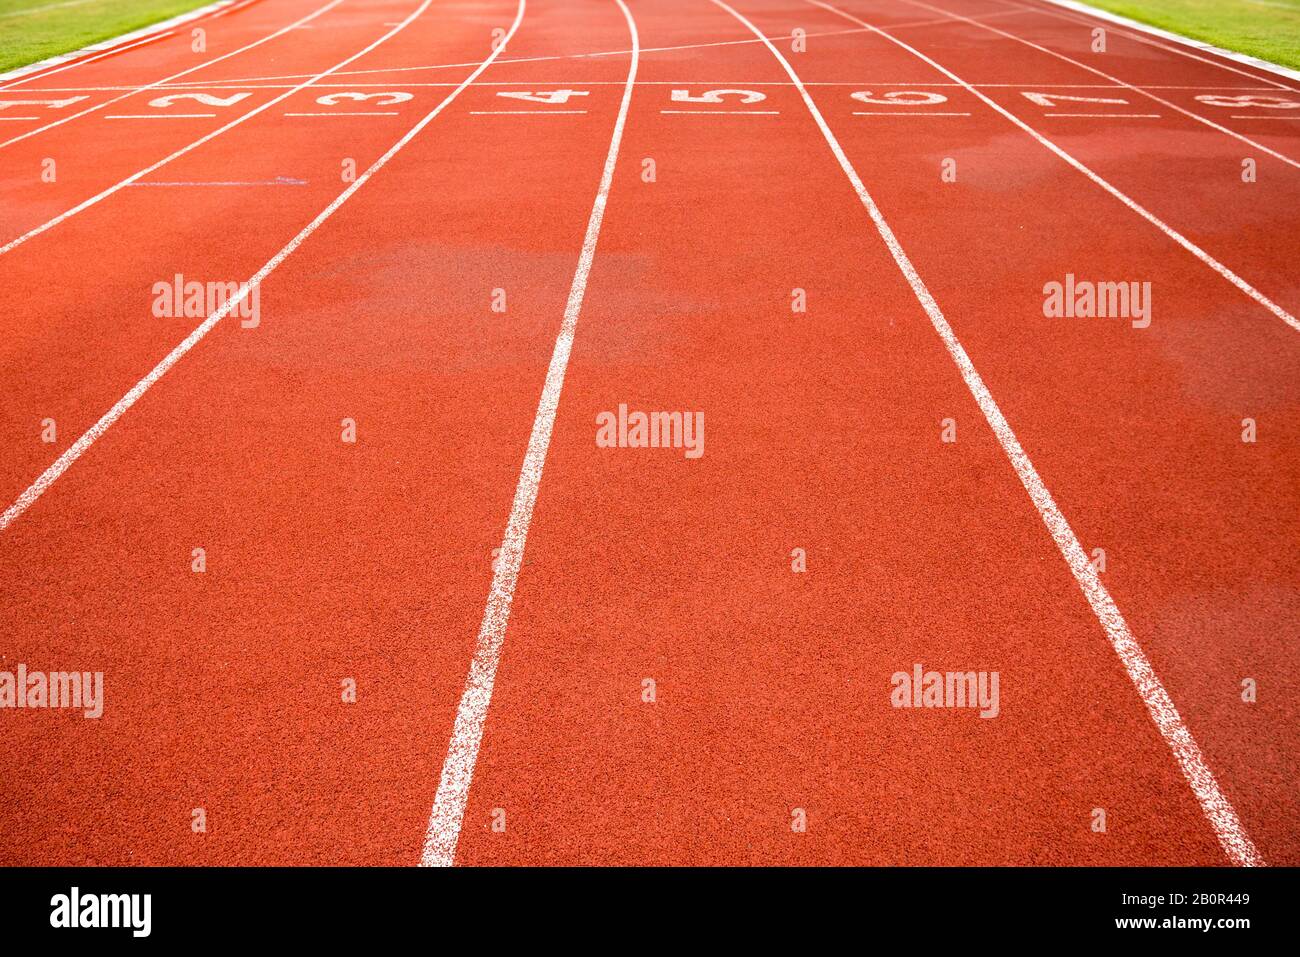 Sport, game, competition and exercise concept.red rubber racetracks running lane with number and line in white color. Jogging track, outdoor stadium Stock Photo